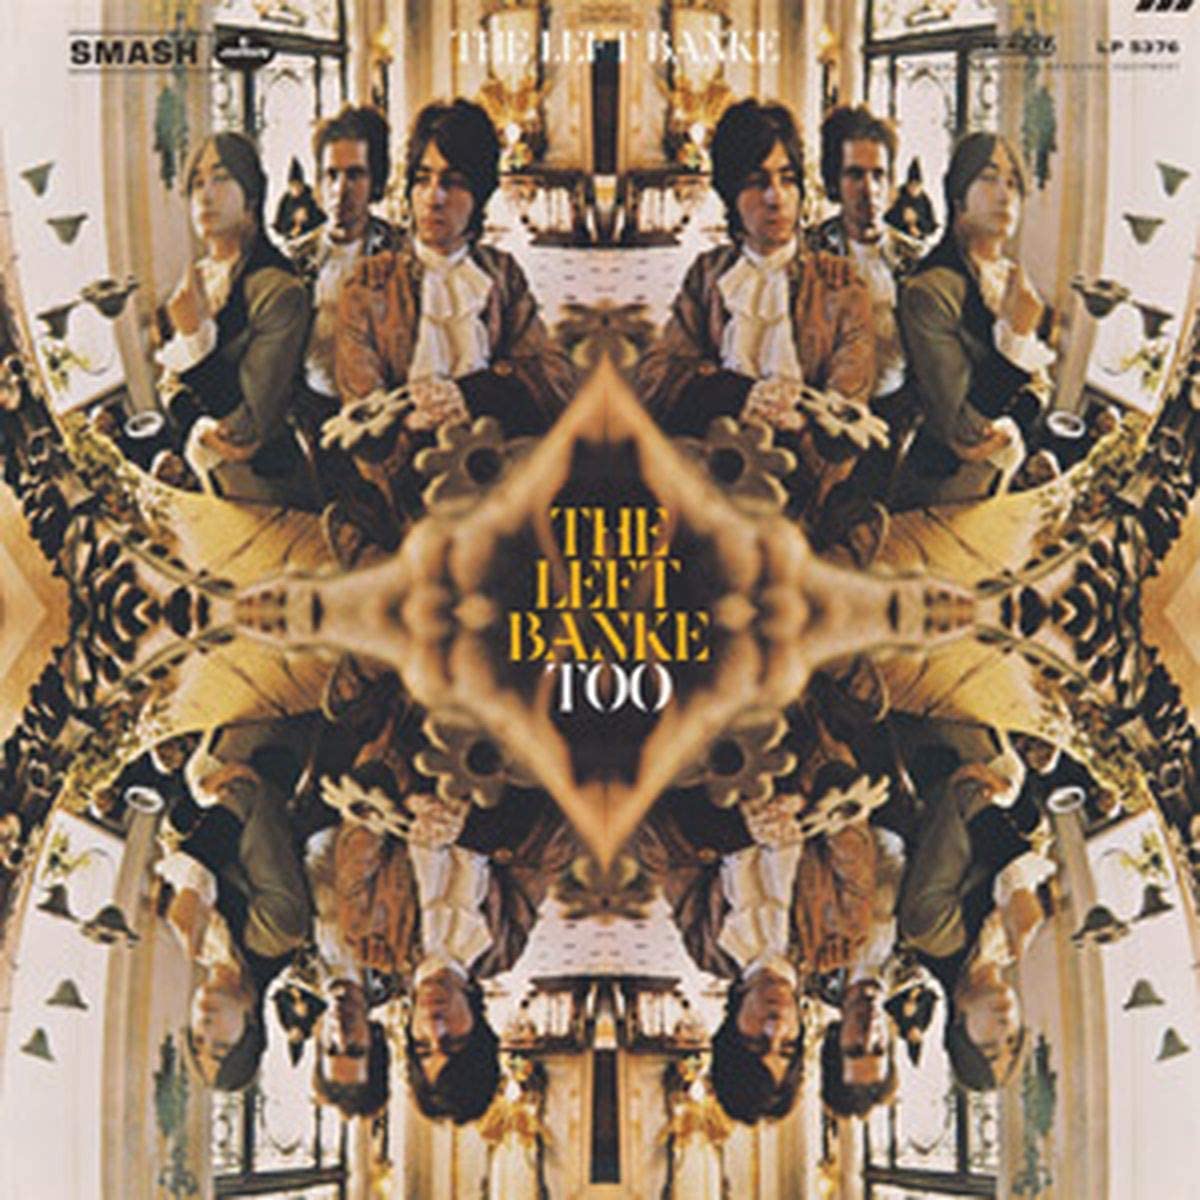 Left Banke, The/Too [LP]